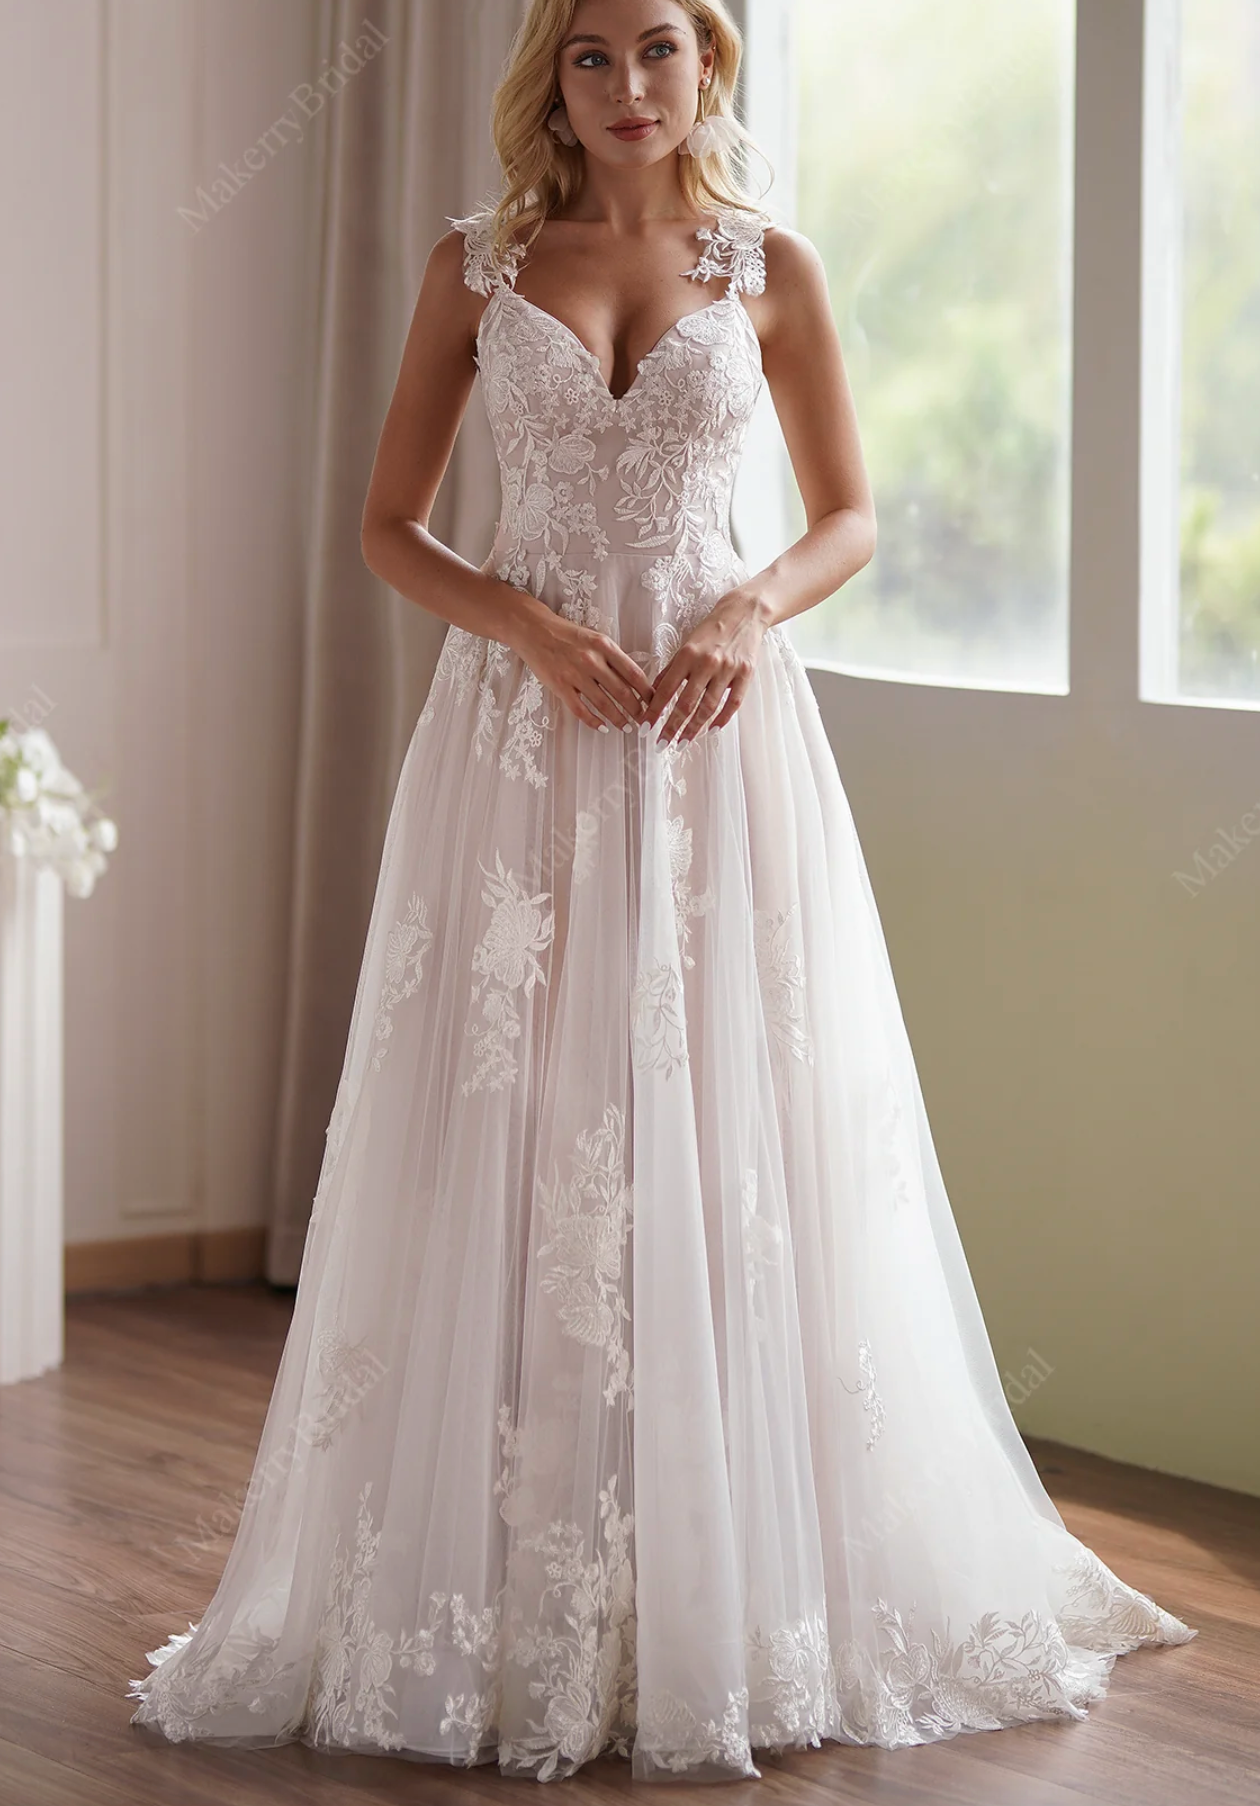 Delicate Shimmering Lace Wedding Gown With Sweetheart Bodice – TulleLux  Bridal Crowns & Accessories